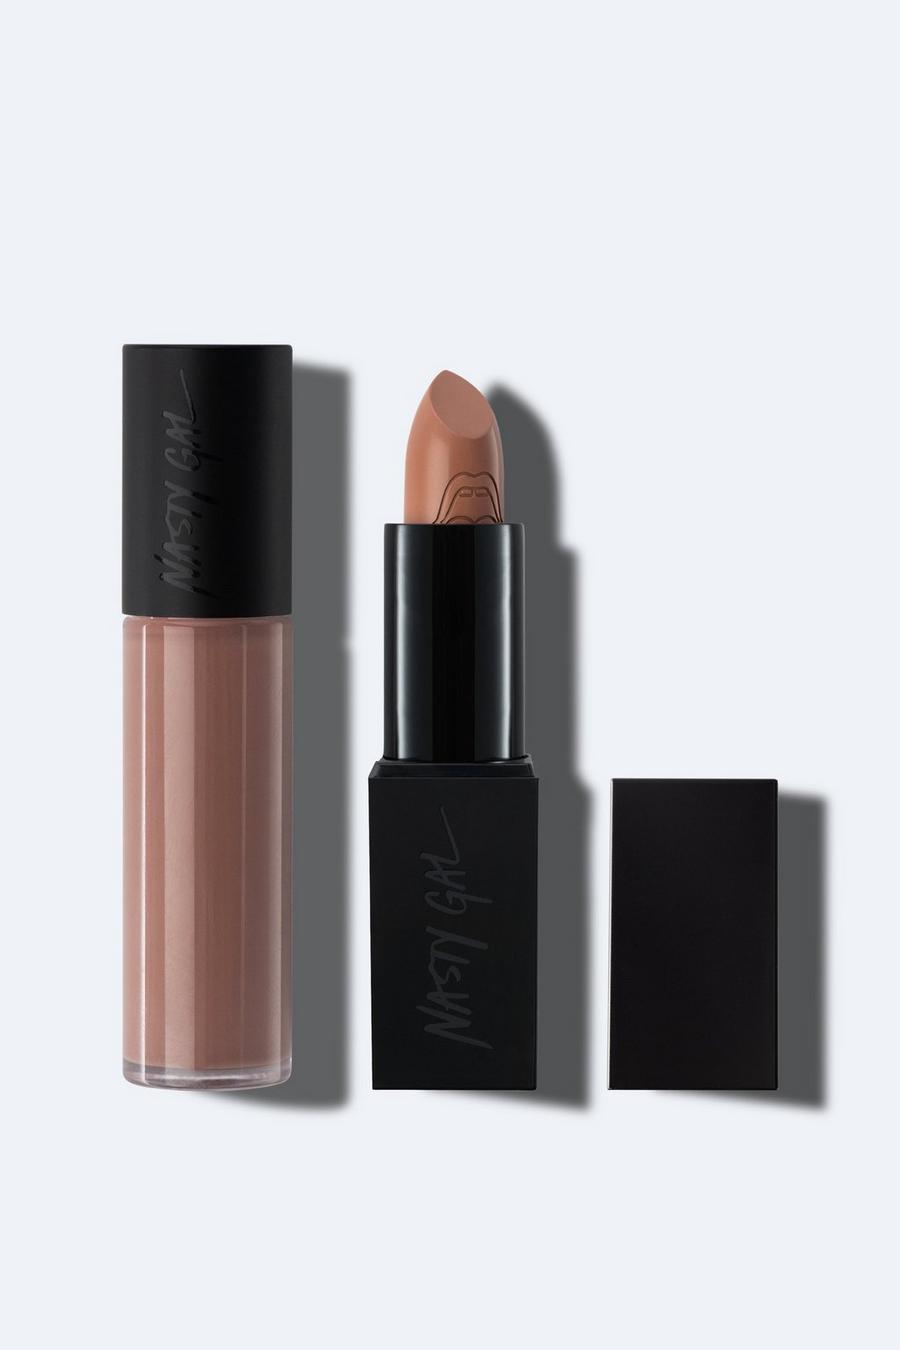 Nasty Gal Beauty Luxe Lipstick and Lipgloss 2 Pc Set